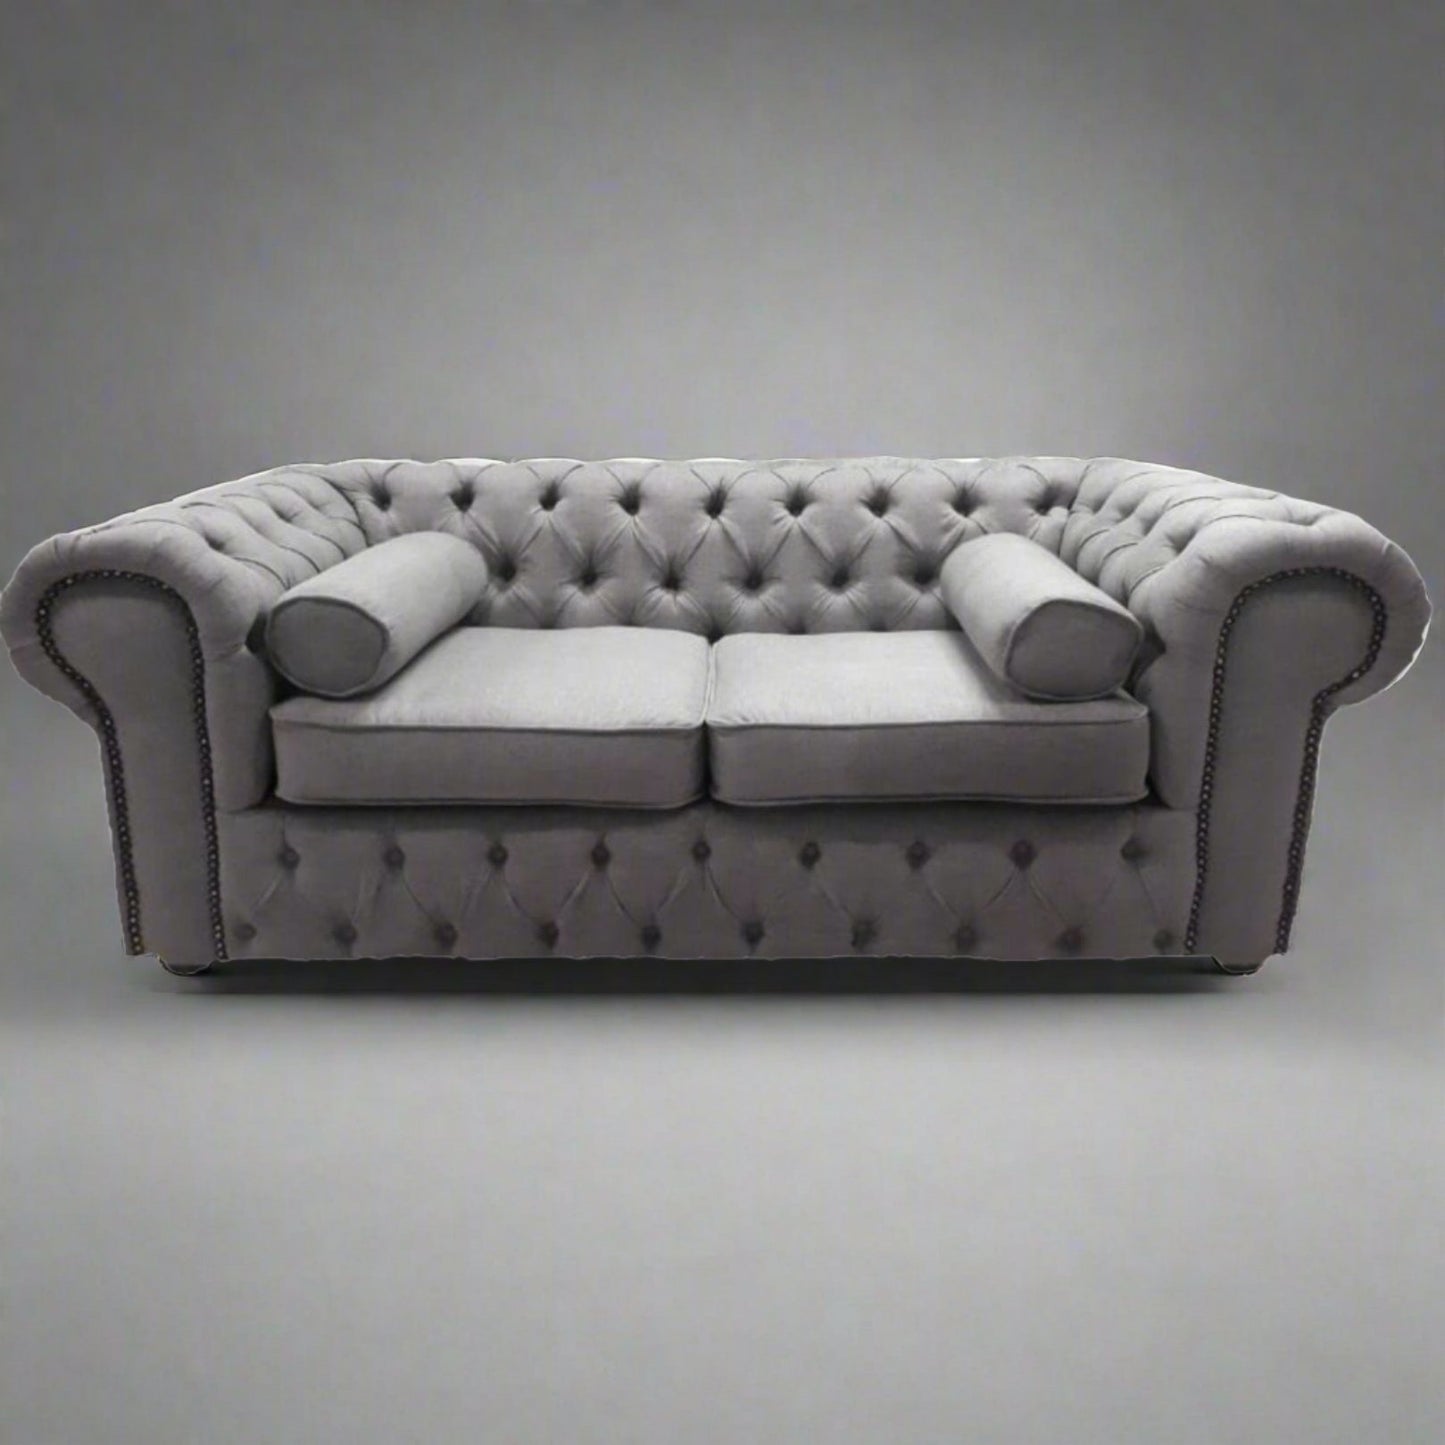 Chesterfield Couch - That Couch Place